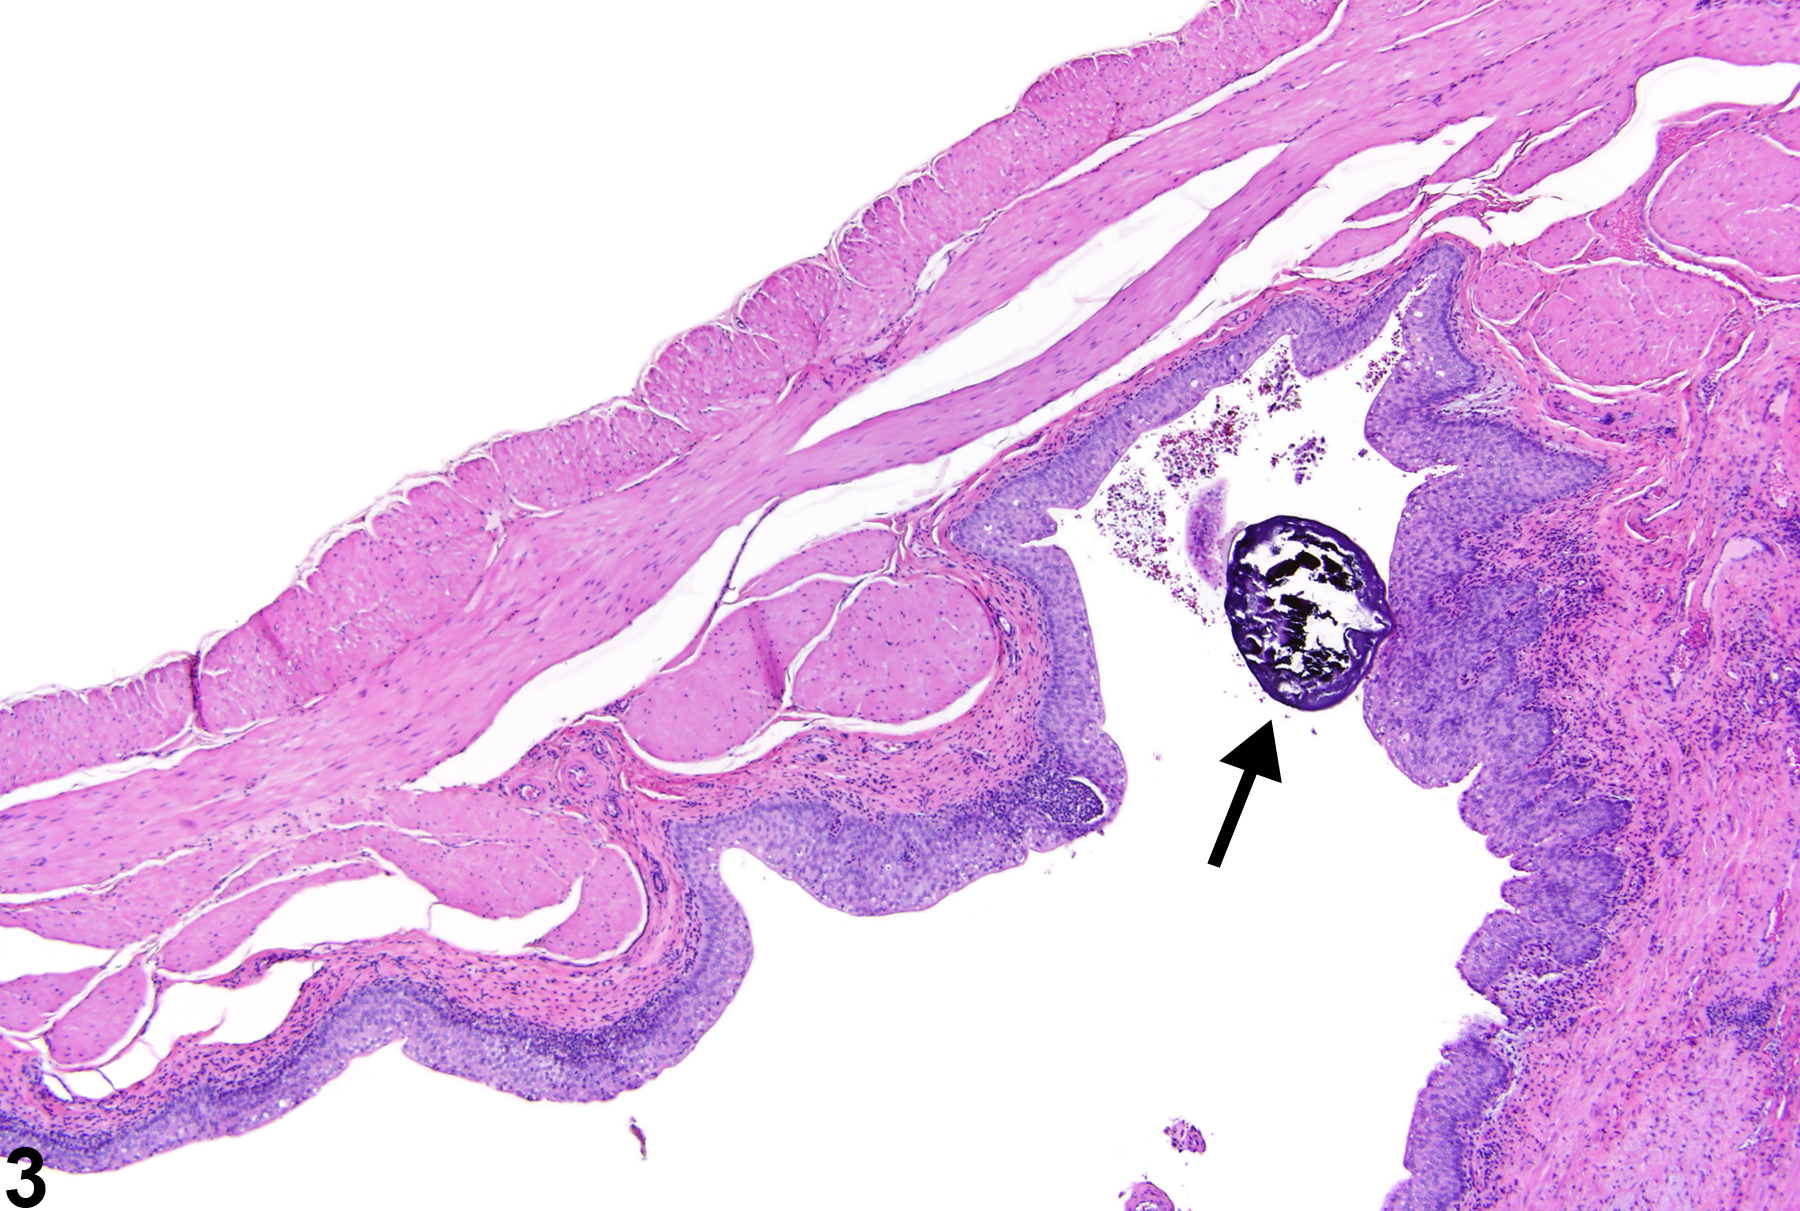 Image of calculus in the urinary bladder from a female Harlan Sprague-Dawley rat in a chronic study